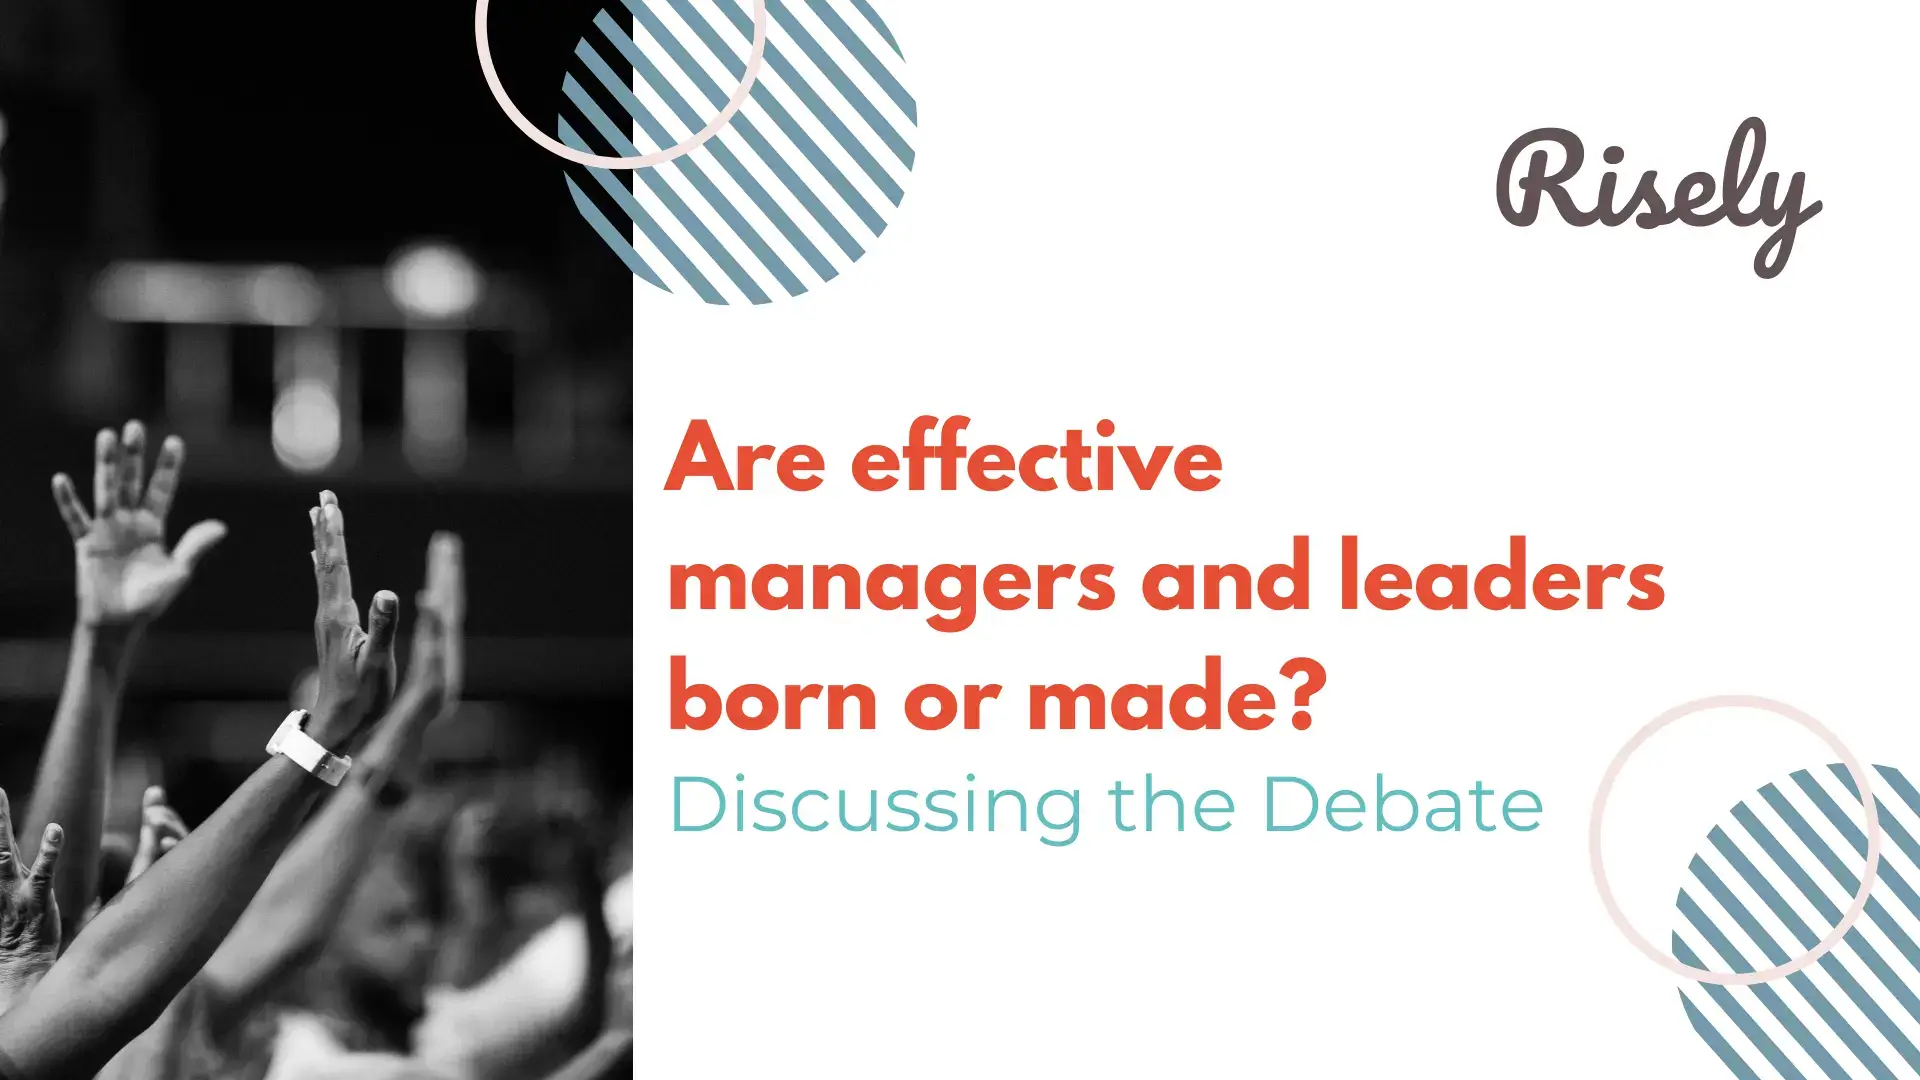 Are effective managers and leaders born or made? Discussing the Debate